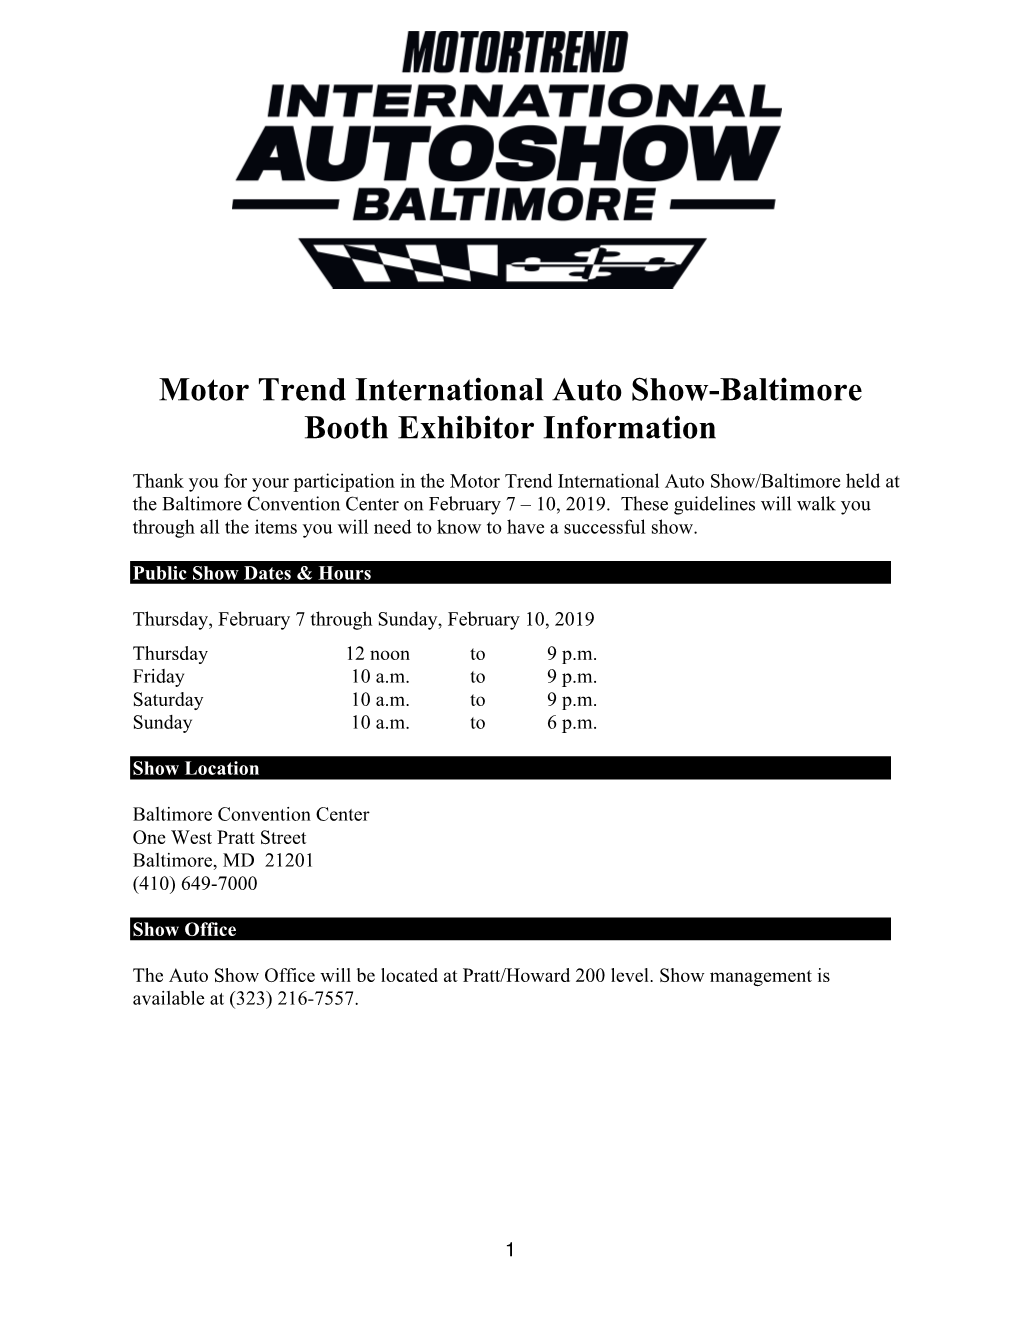 Motor Trend International Auto Show-Baltimore Booth Exhibitor Information